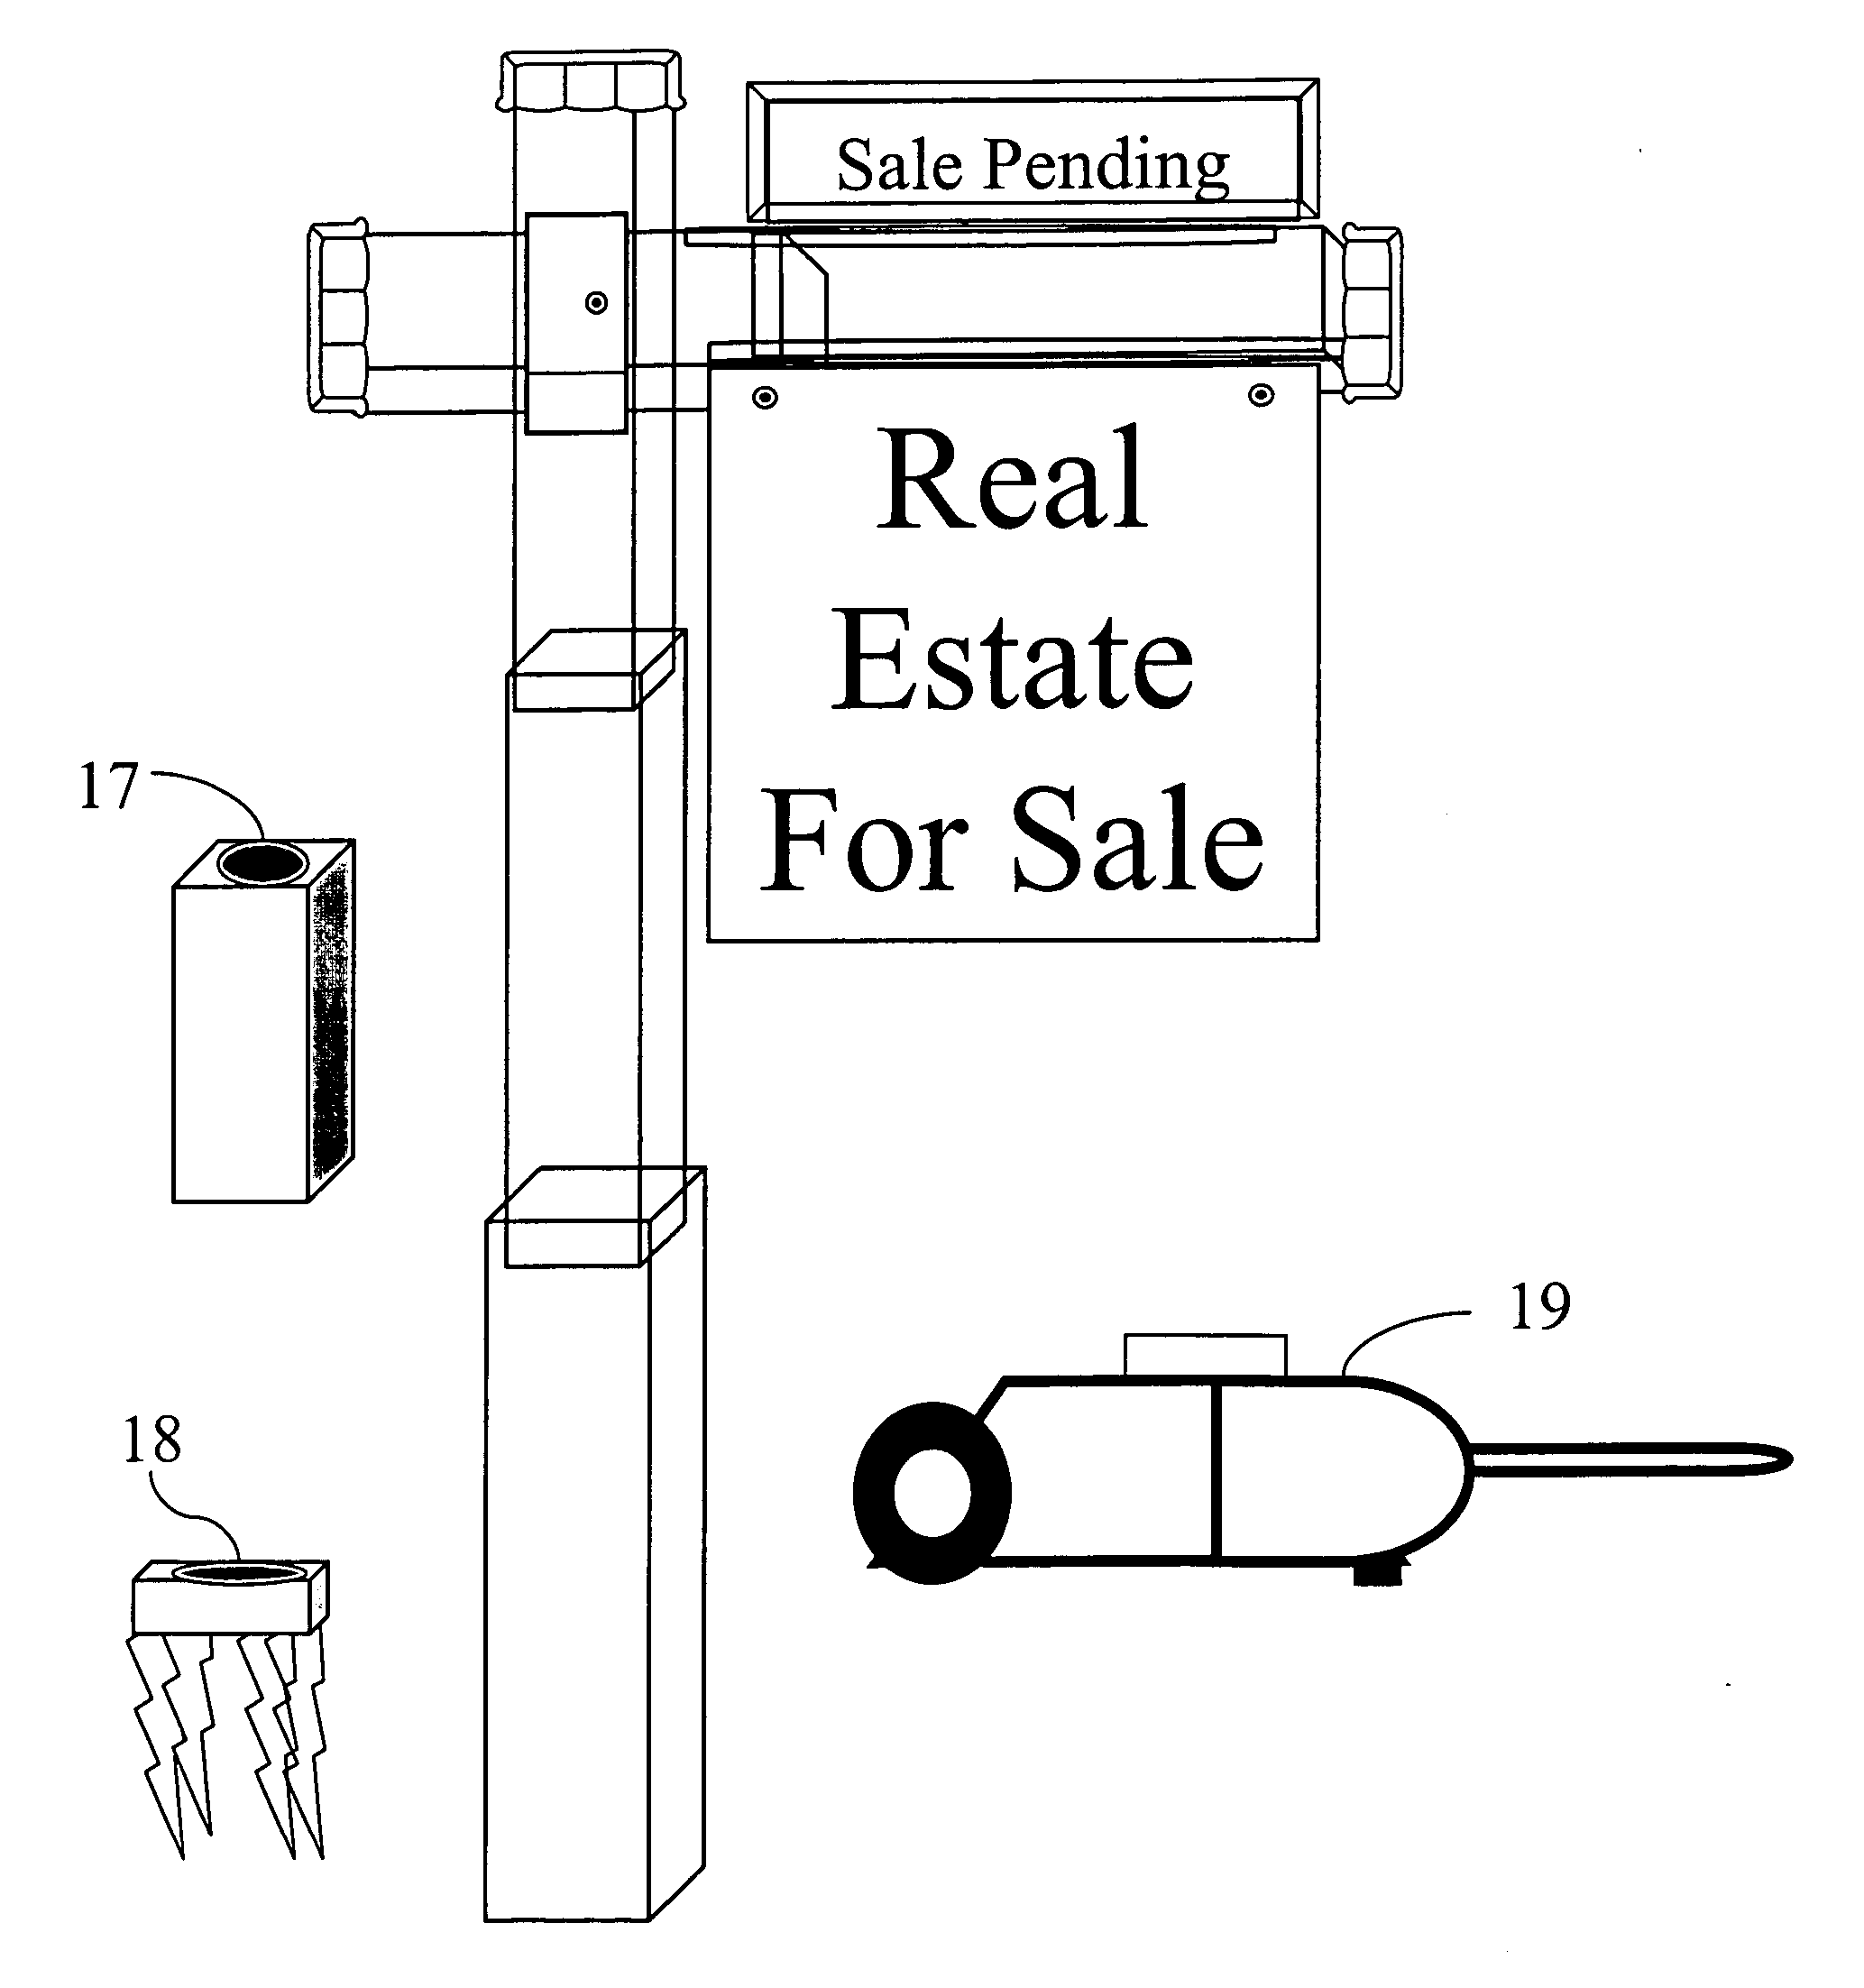 Real estate to go sign post